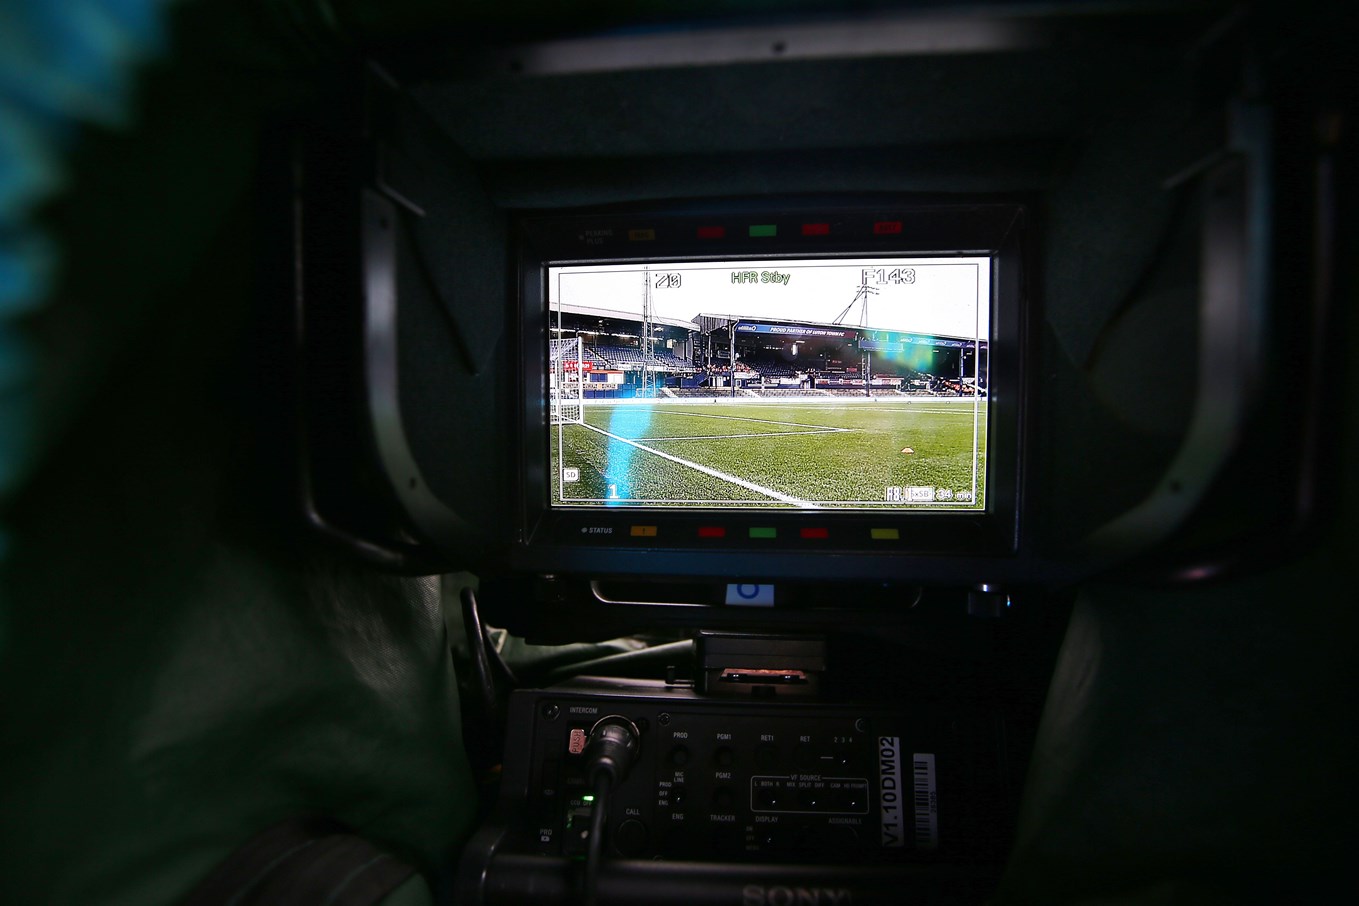 Kenilworth Road, seen from the backscreen of a broadcast camera.